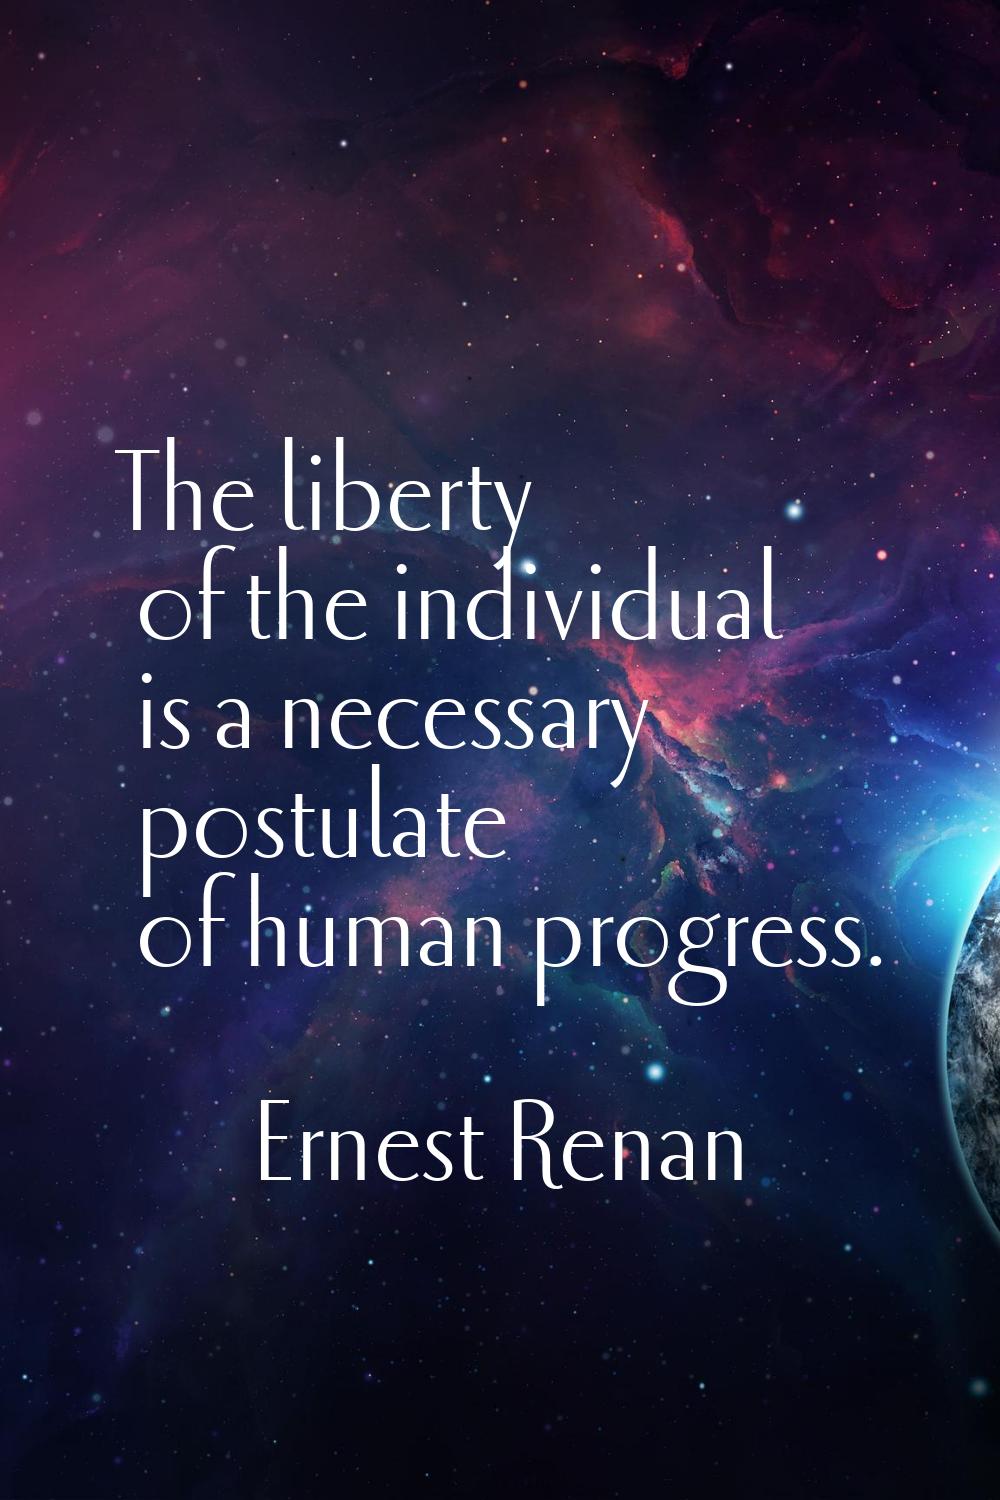 The liberty of the individual is a necessary postulate of human progress.